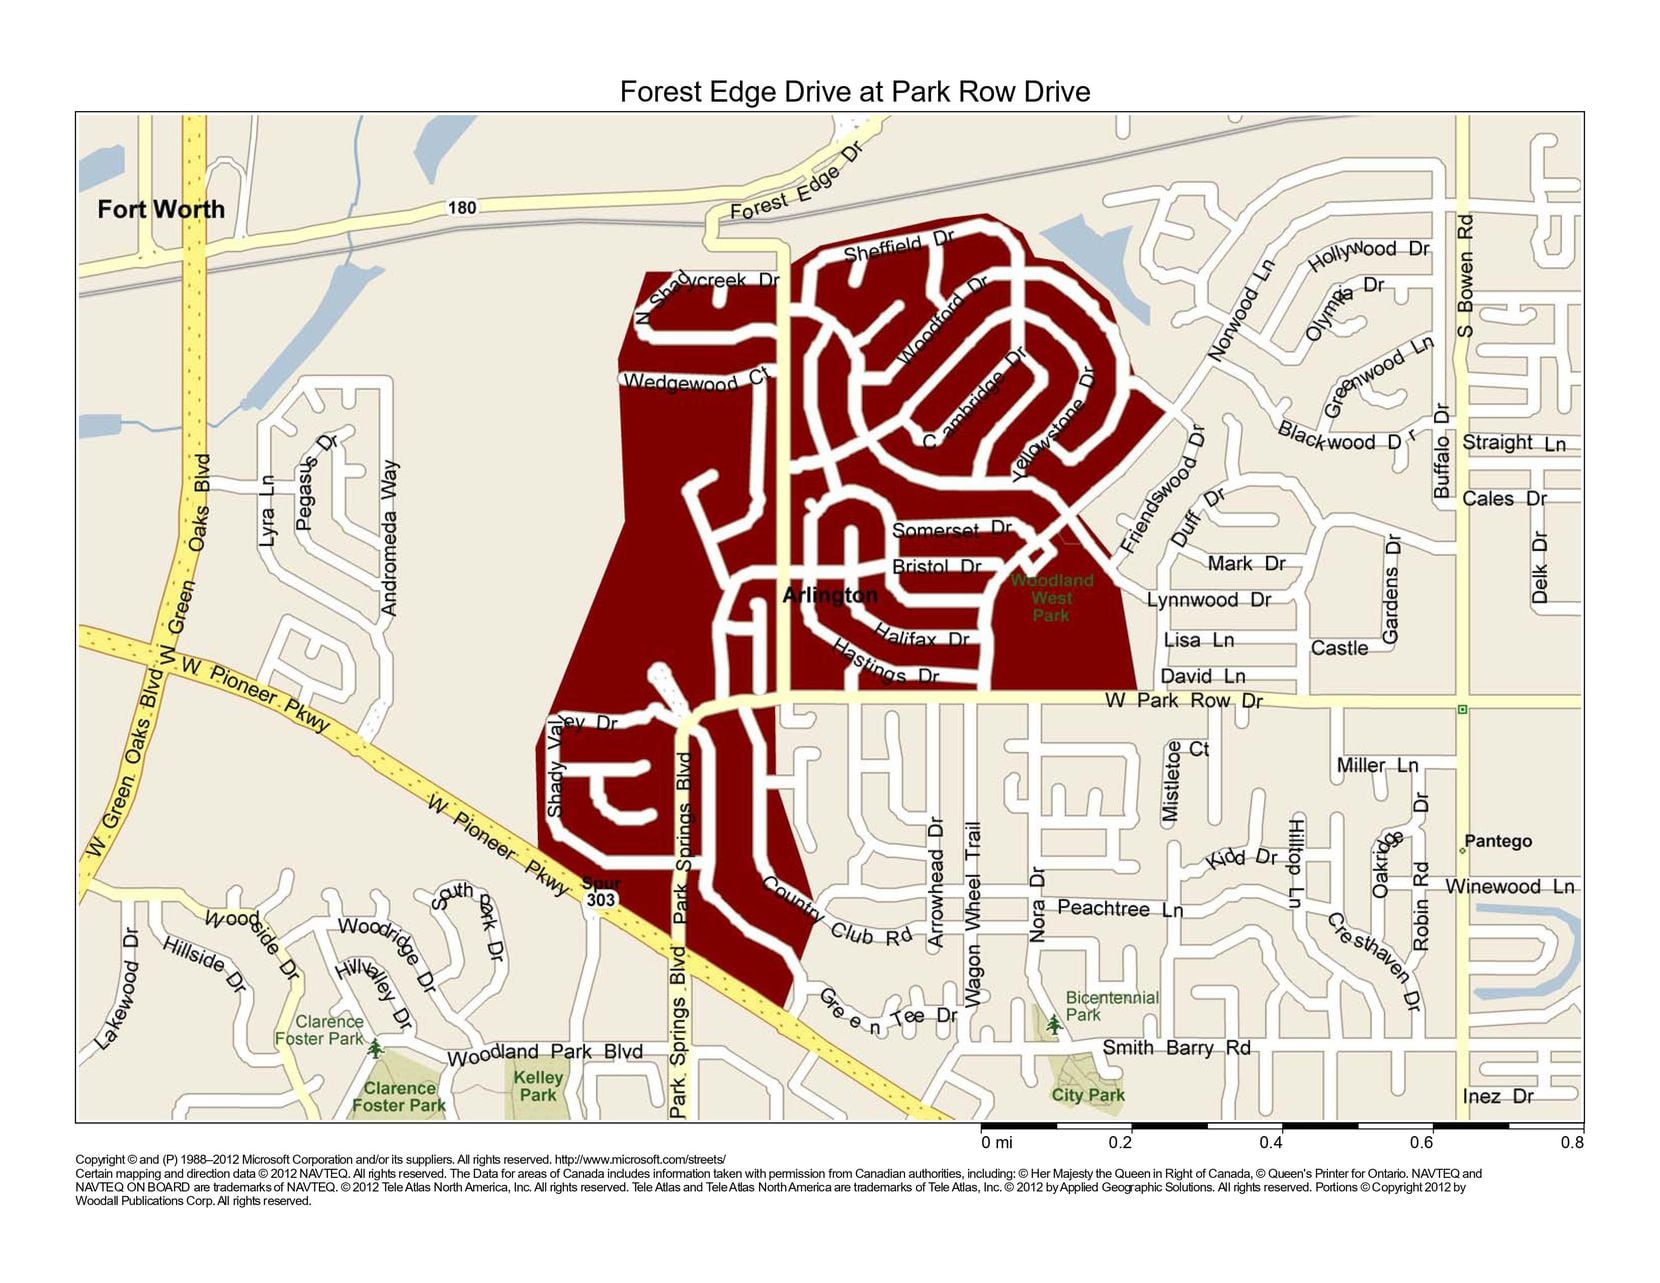 Arlington is spraying for mosquitos on both Oct. 4 and 5, from 9 p.m. to 5 a.m., at Forest...